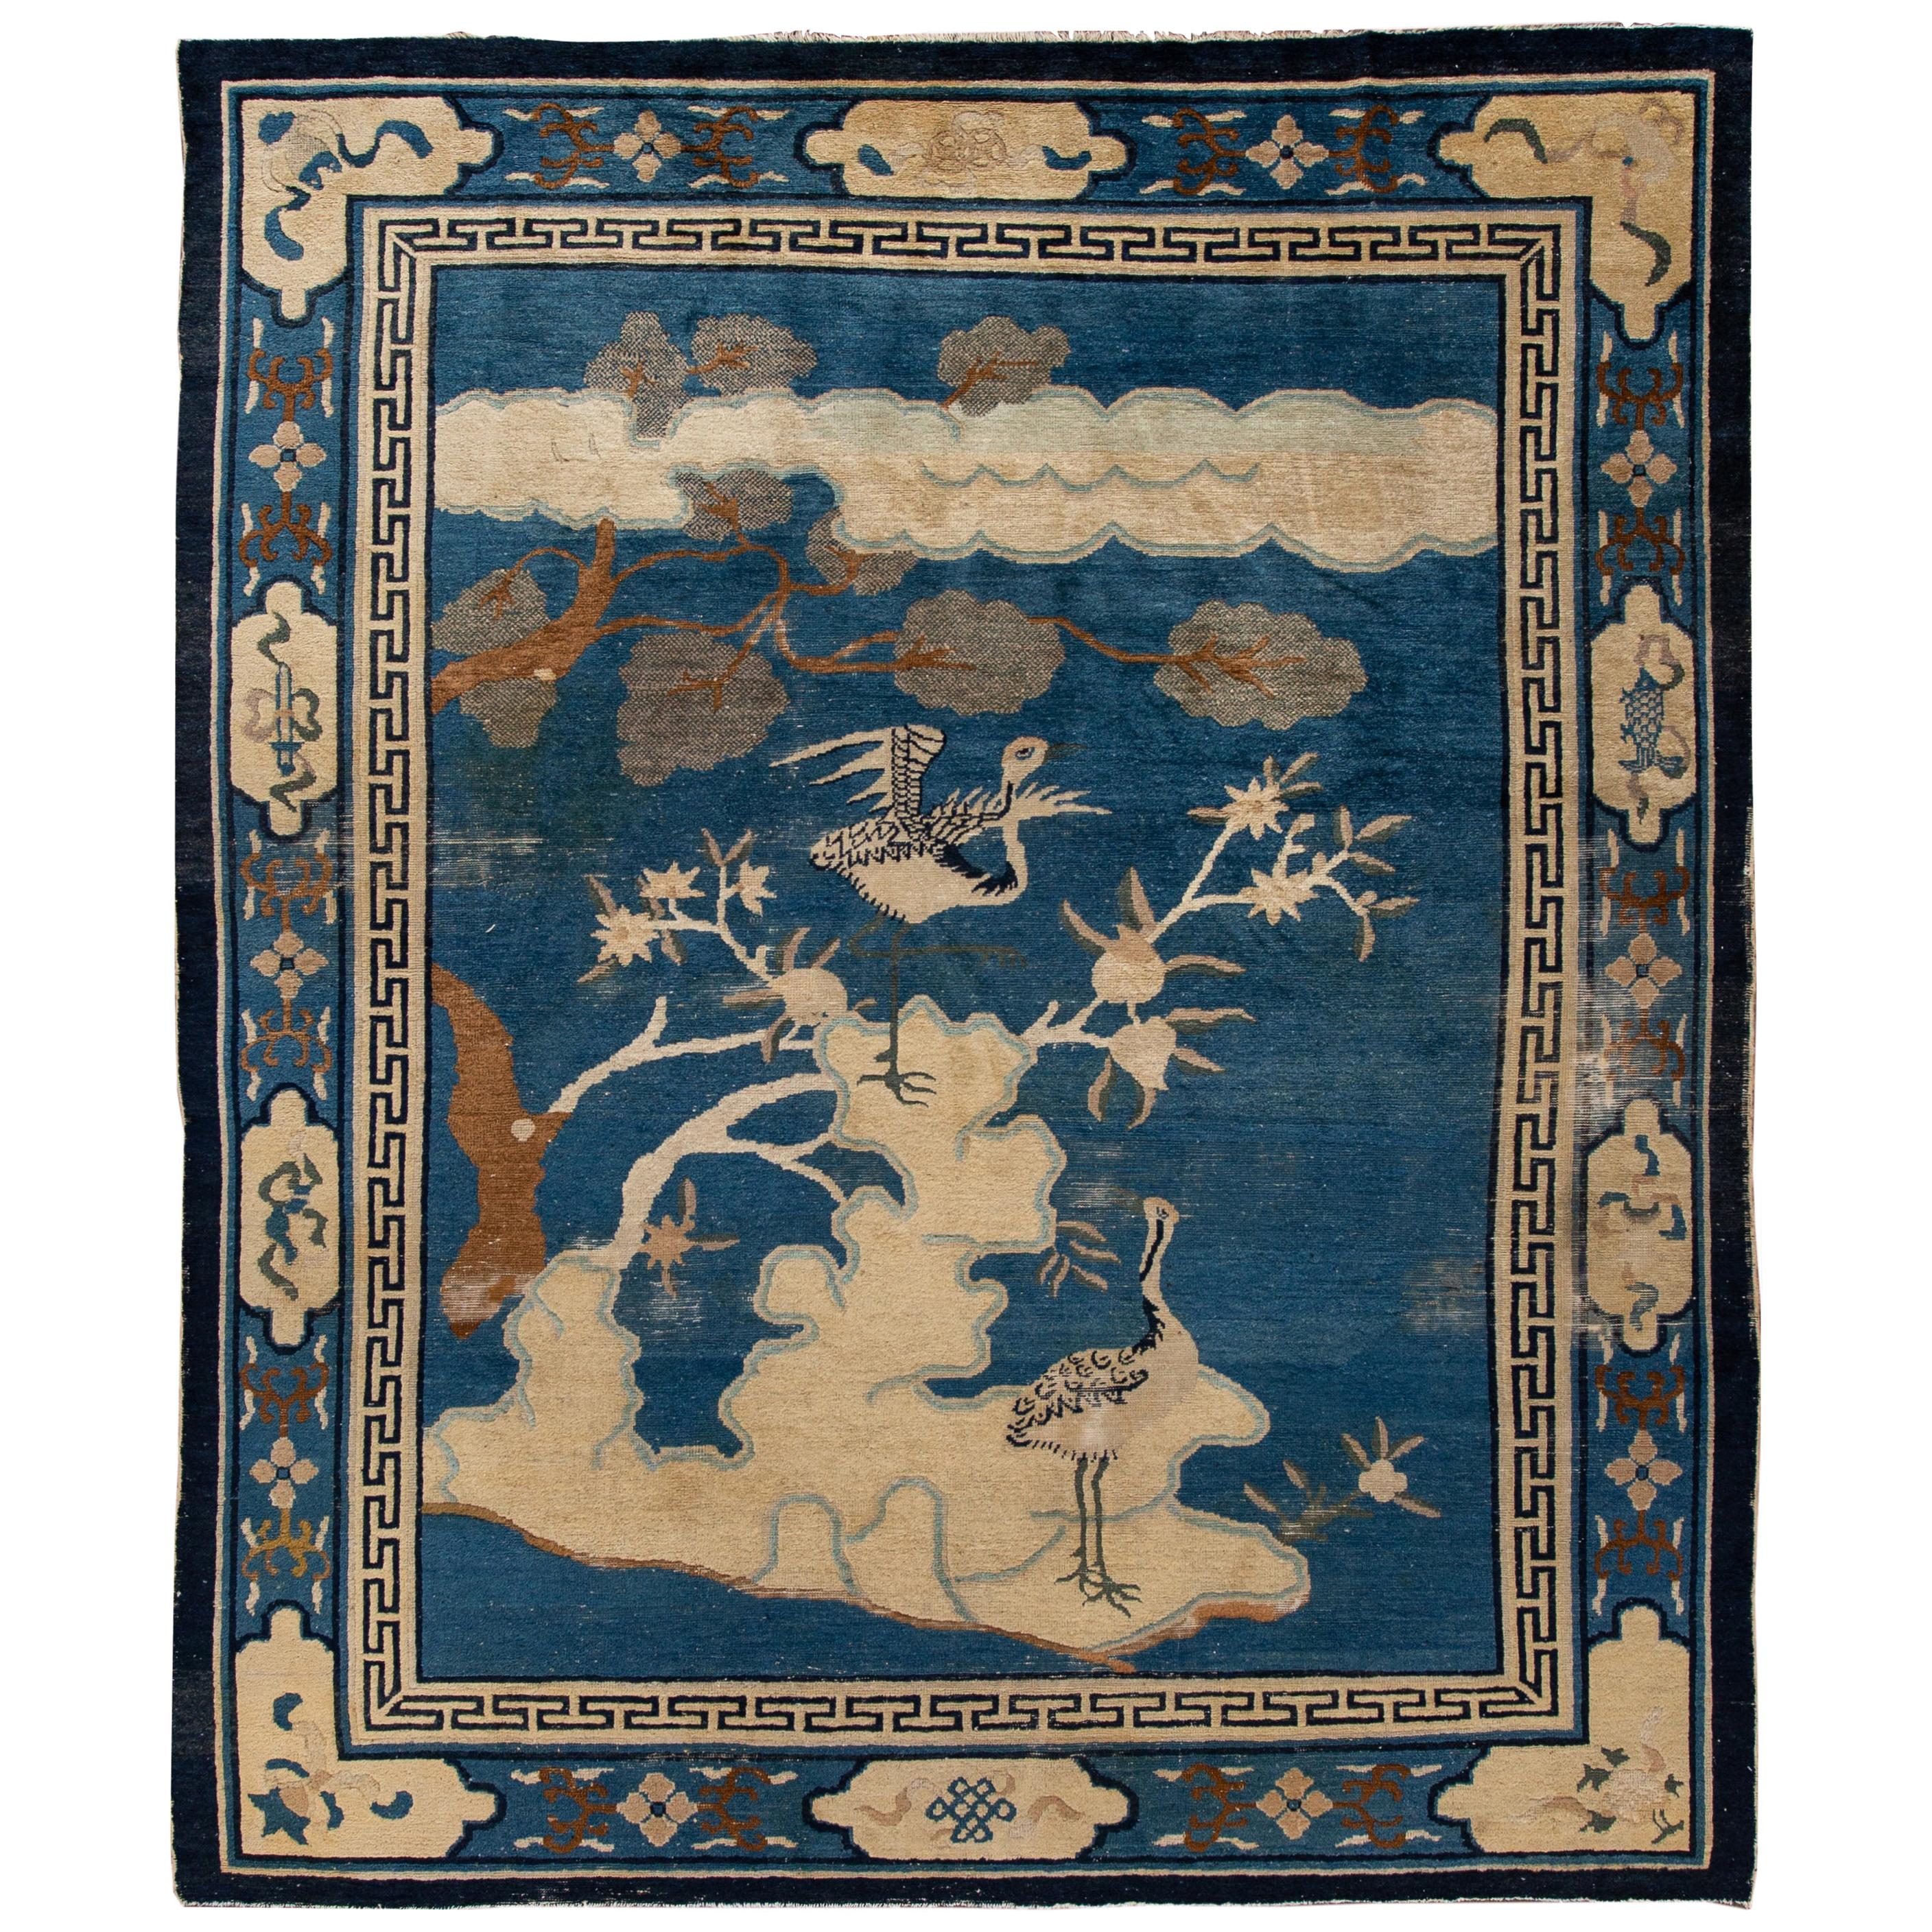 Antique Blue Chinese Peking Bird Design Wool Rug 7 Ft 8 In X 9 Ft 5 In. For Sale